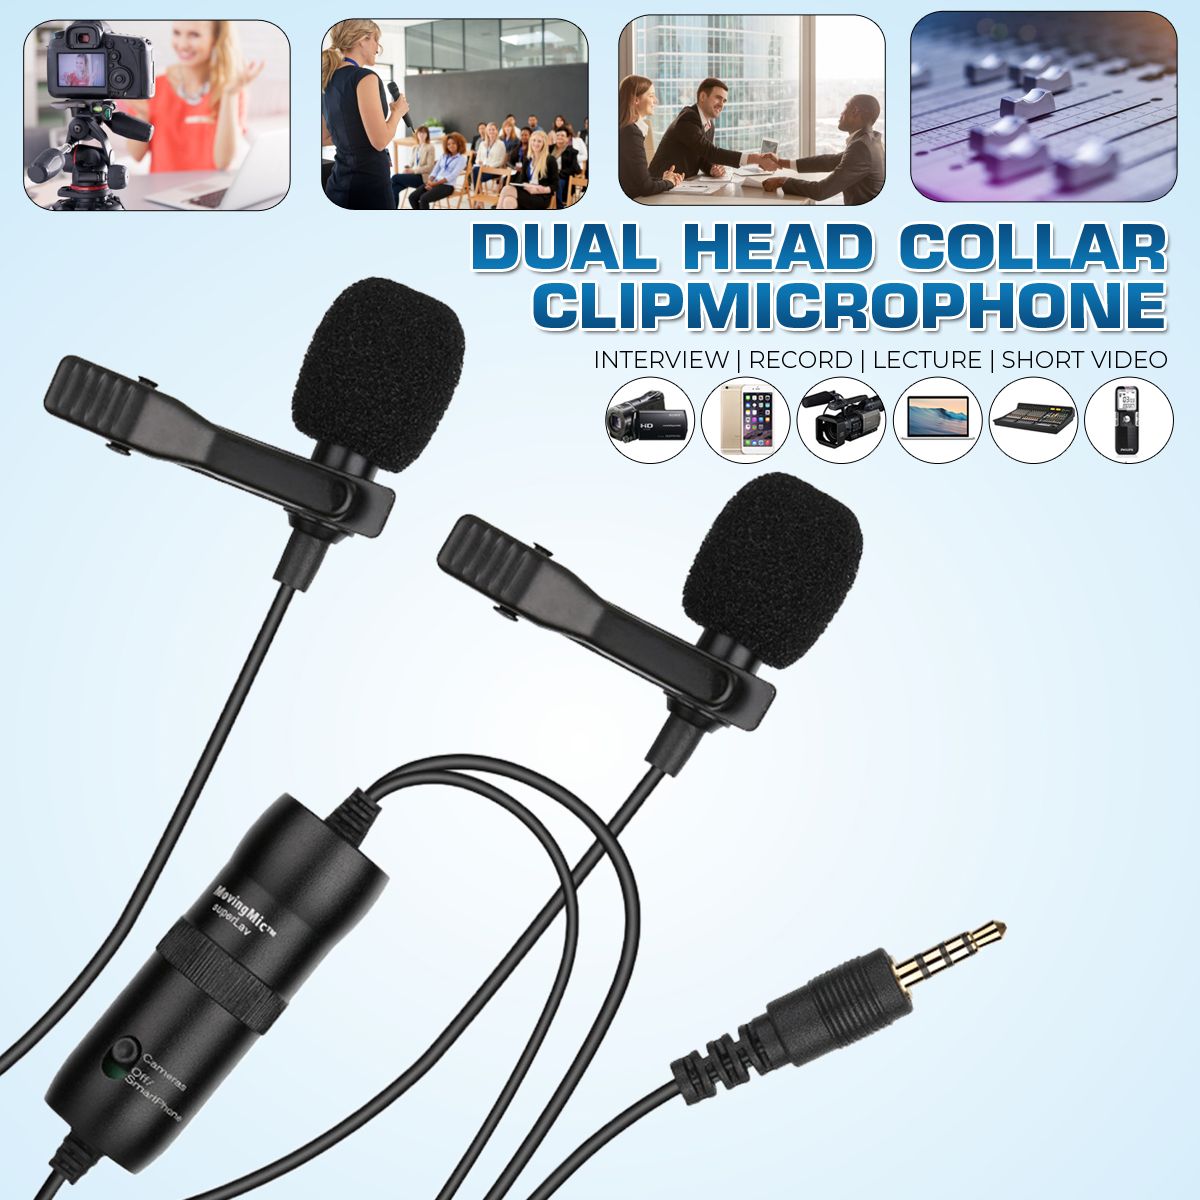 Dual-Head-Collar-Clip-Micrphone-Interview-Record-Lecture-Short-Video-35mm-Micrphone-1687268